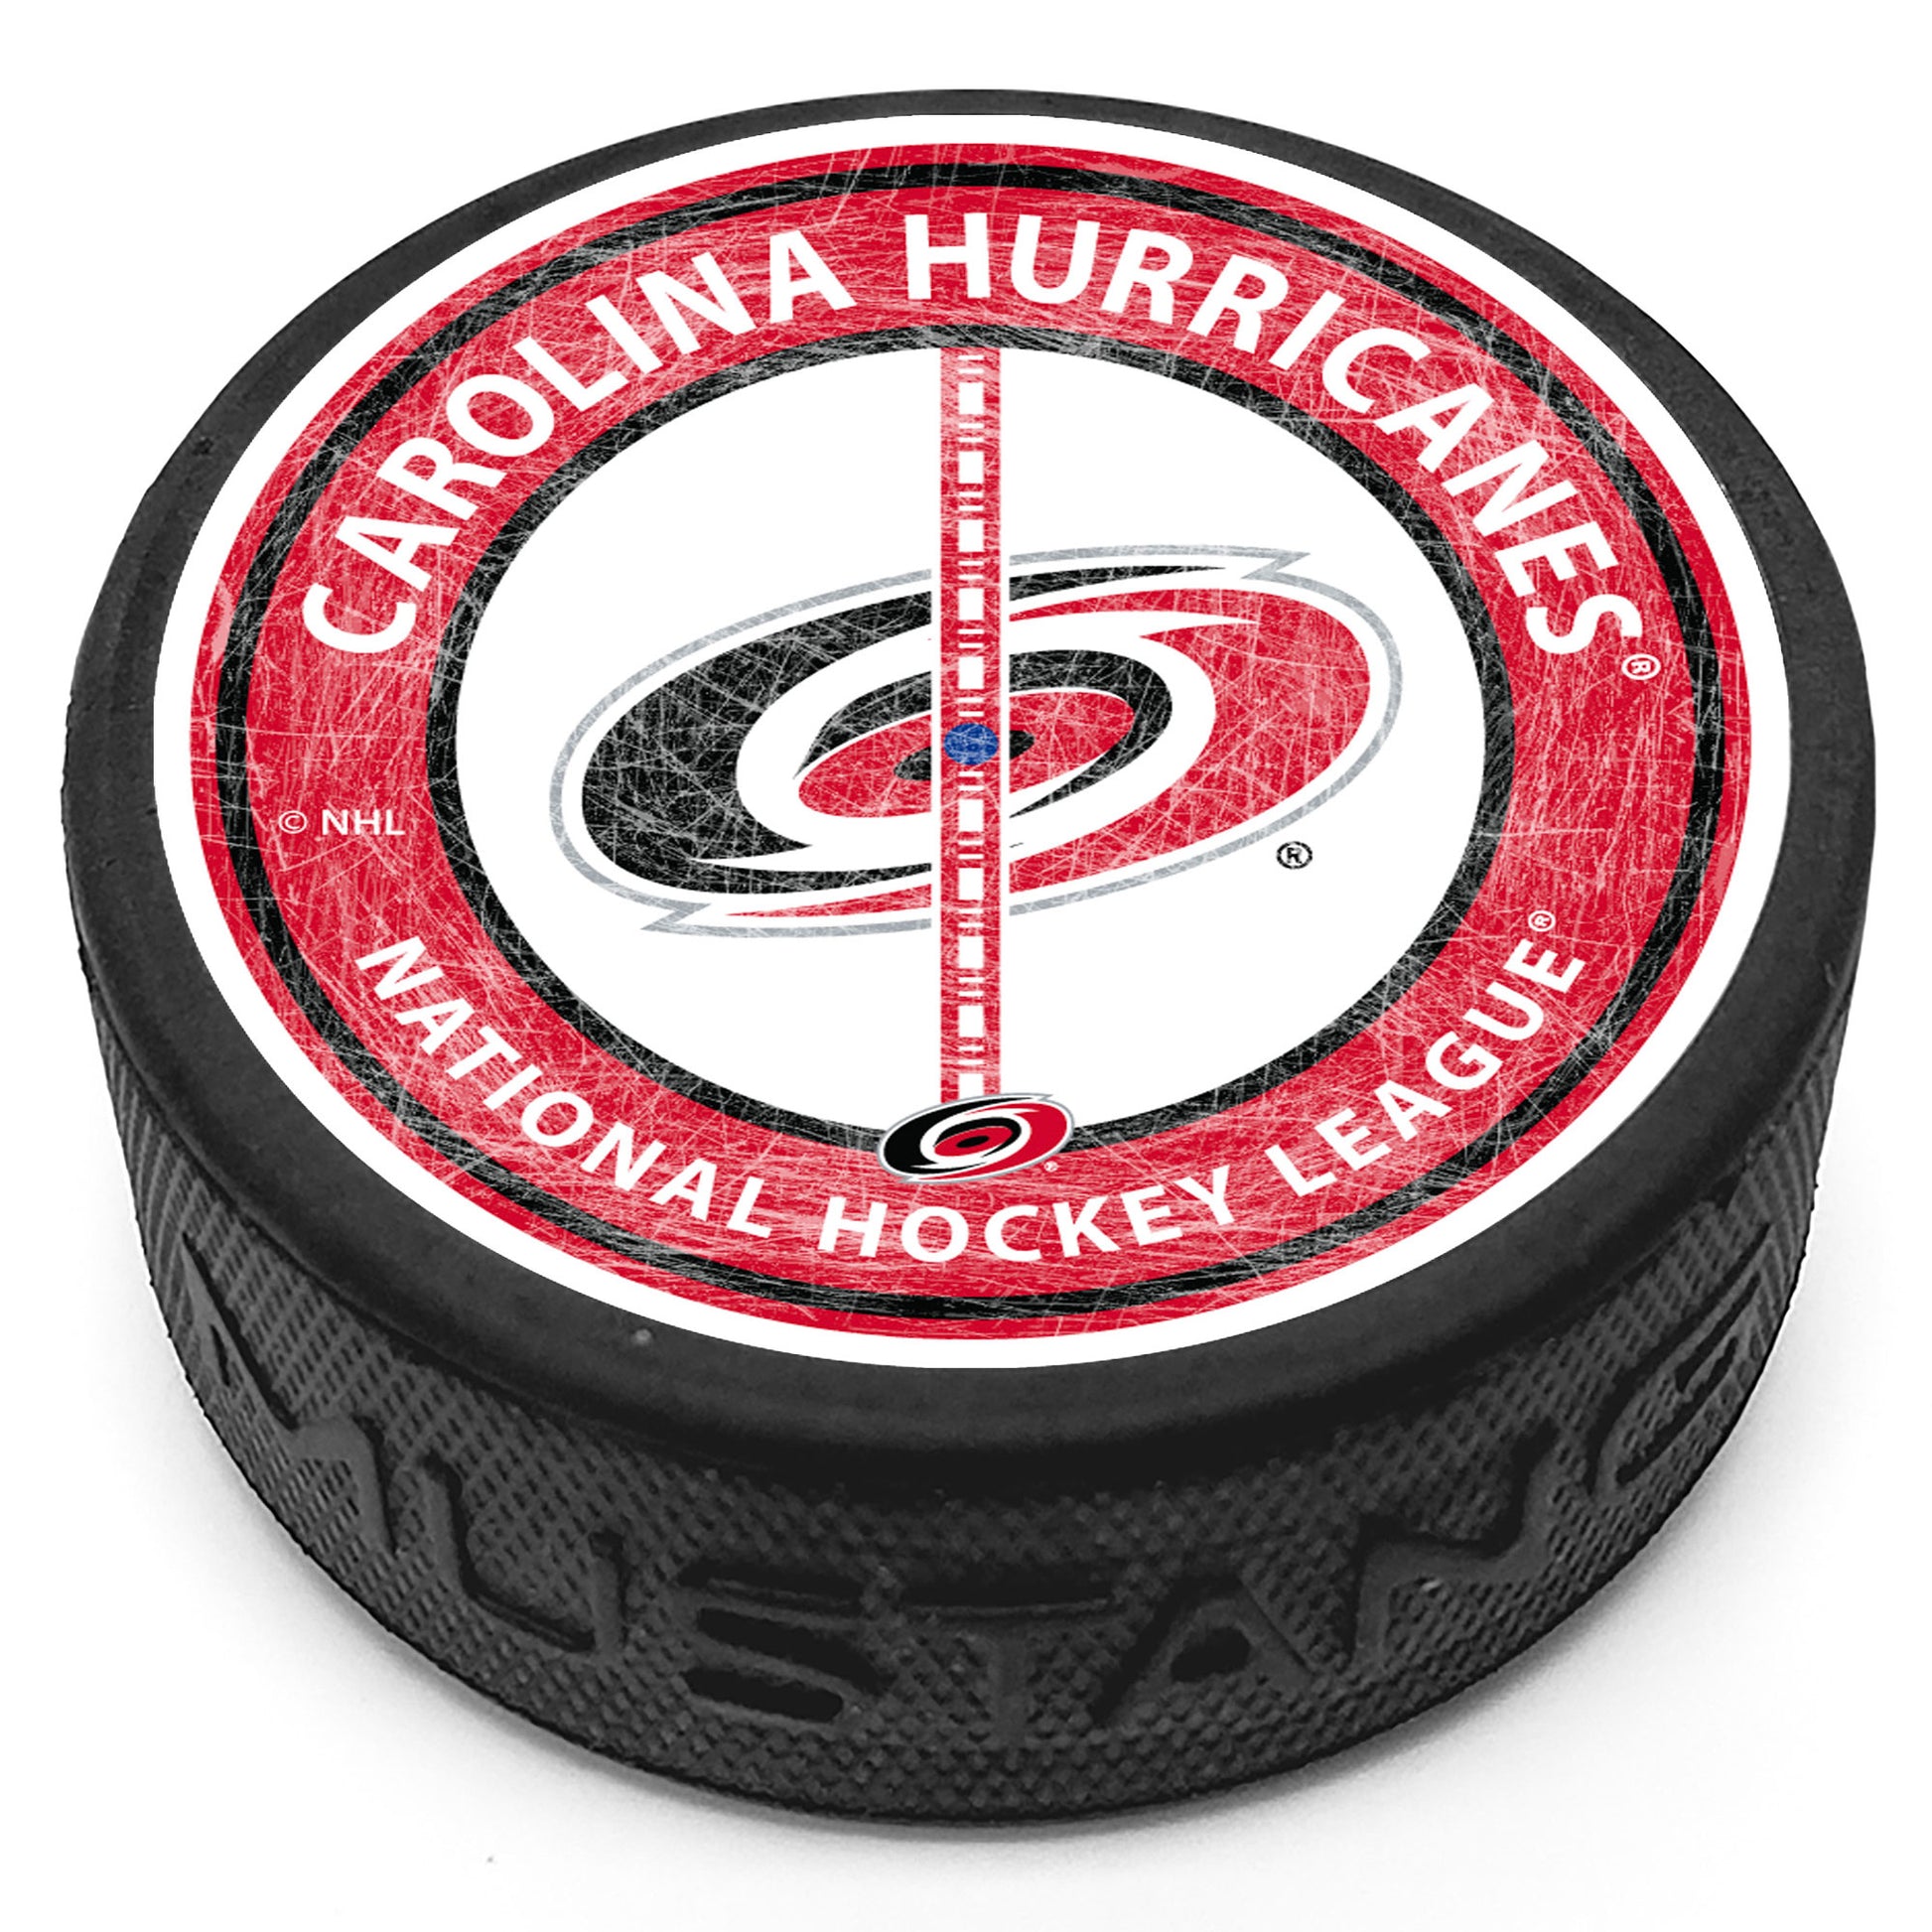 Hockey puck with the Hurricanes center ice logo and center ice line with "Carolina Hurricanes" and "National Hockey League" on the top face.